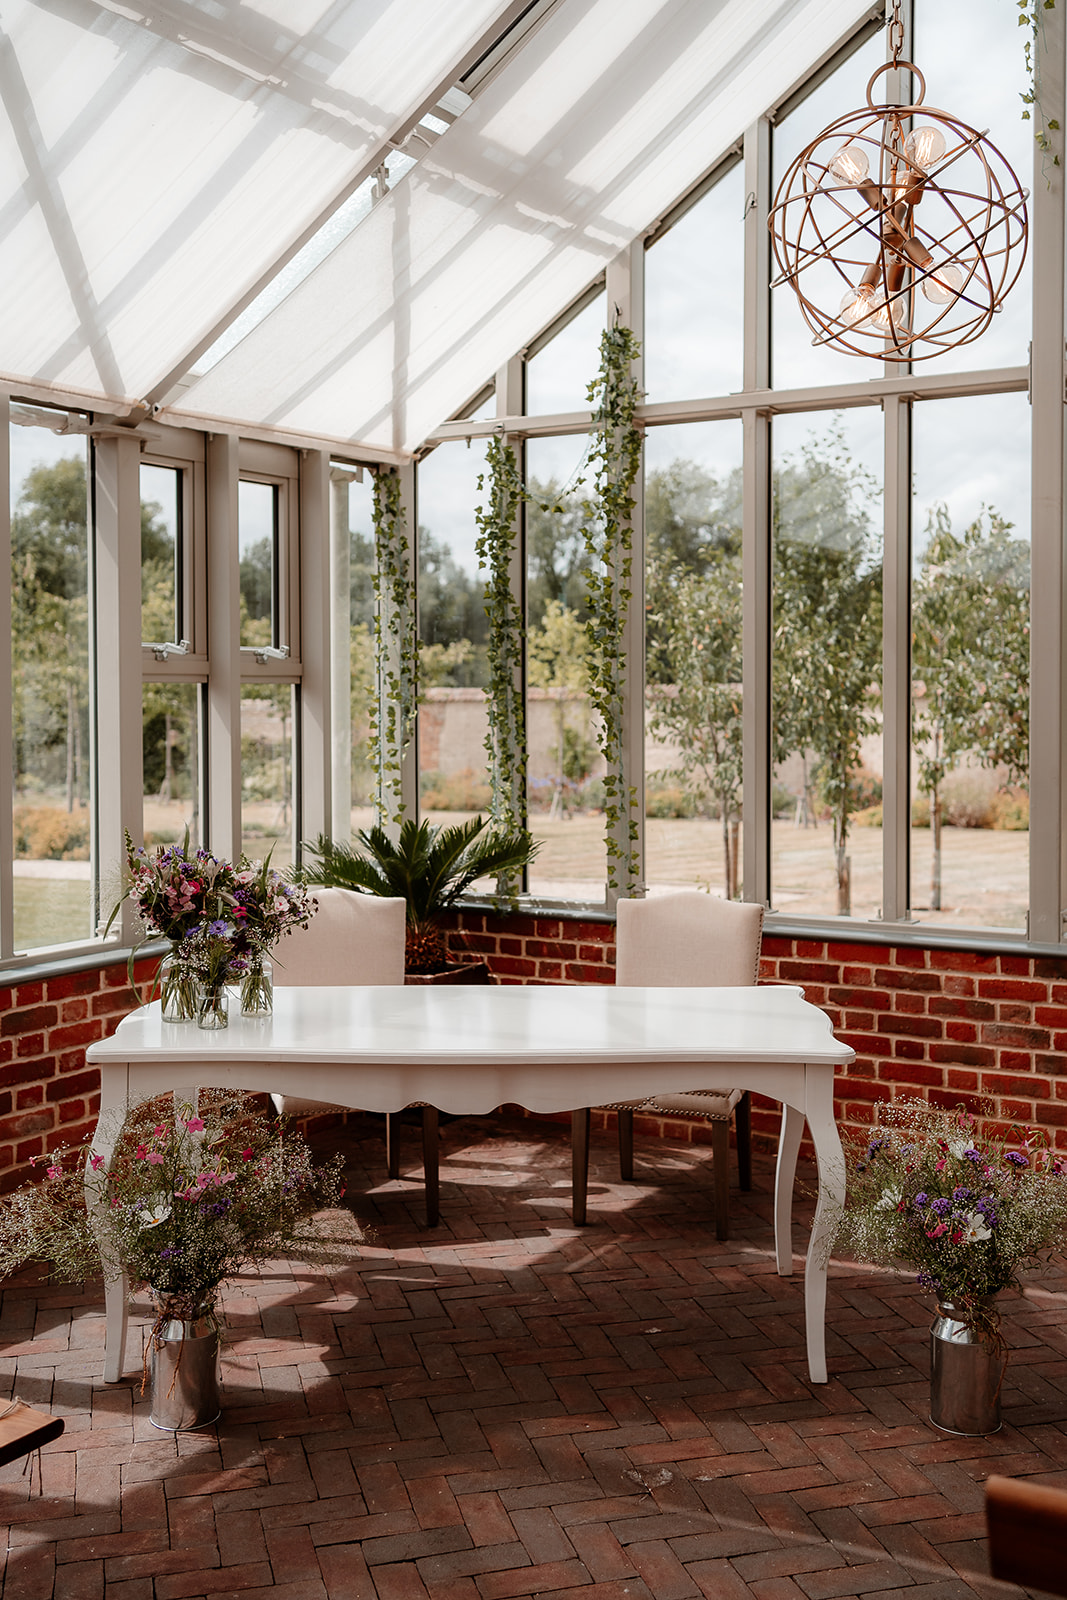 Summer wedding at Syrencot - ceremony in the Glasshouse